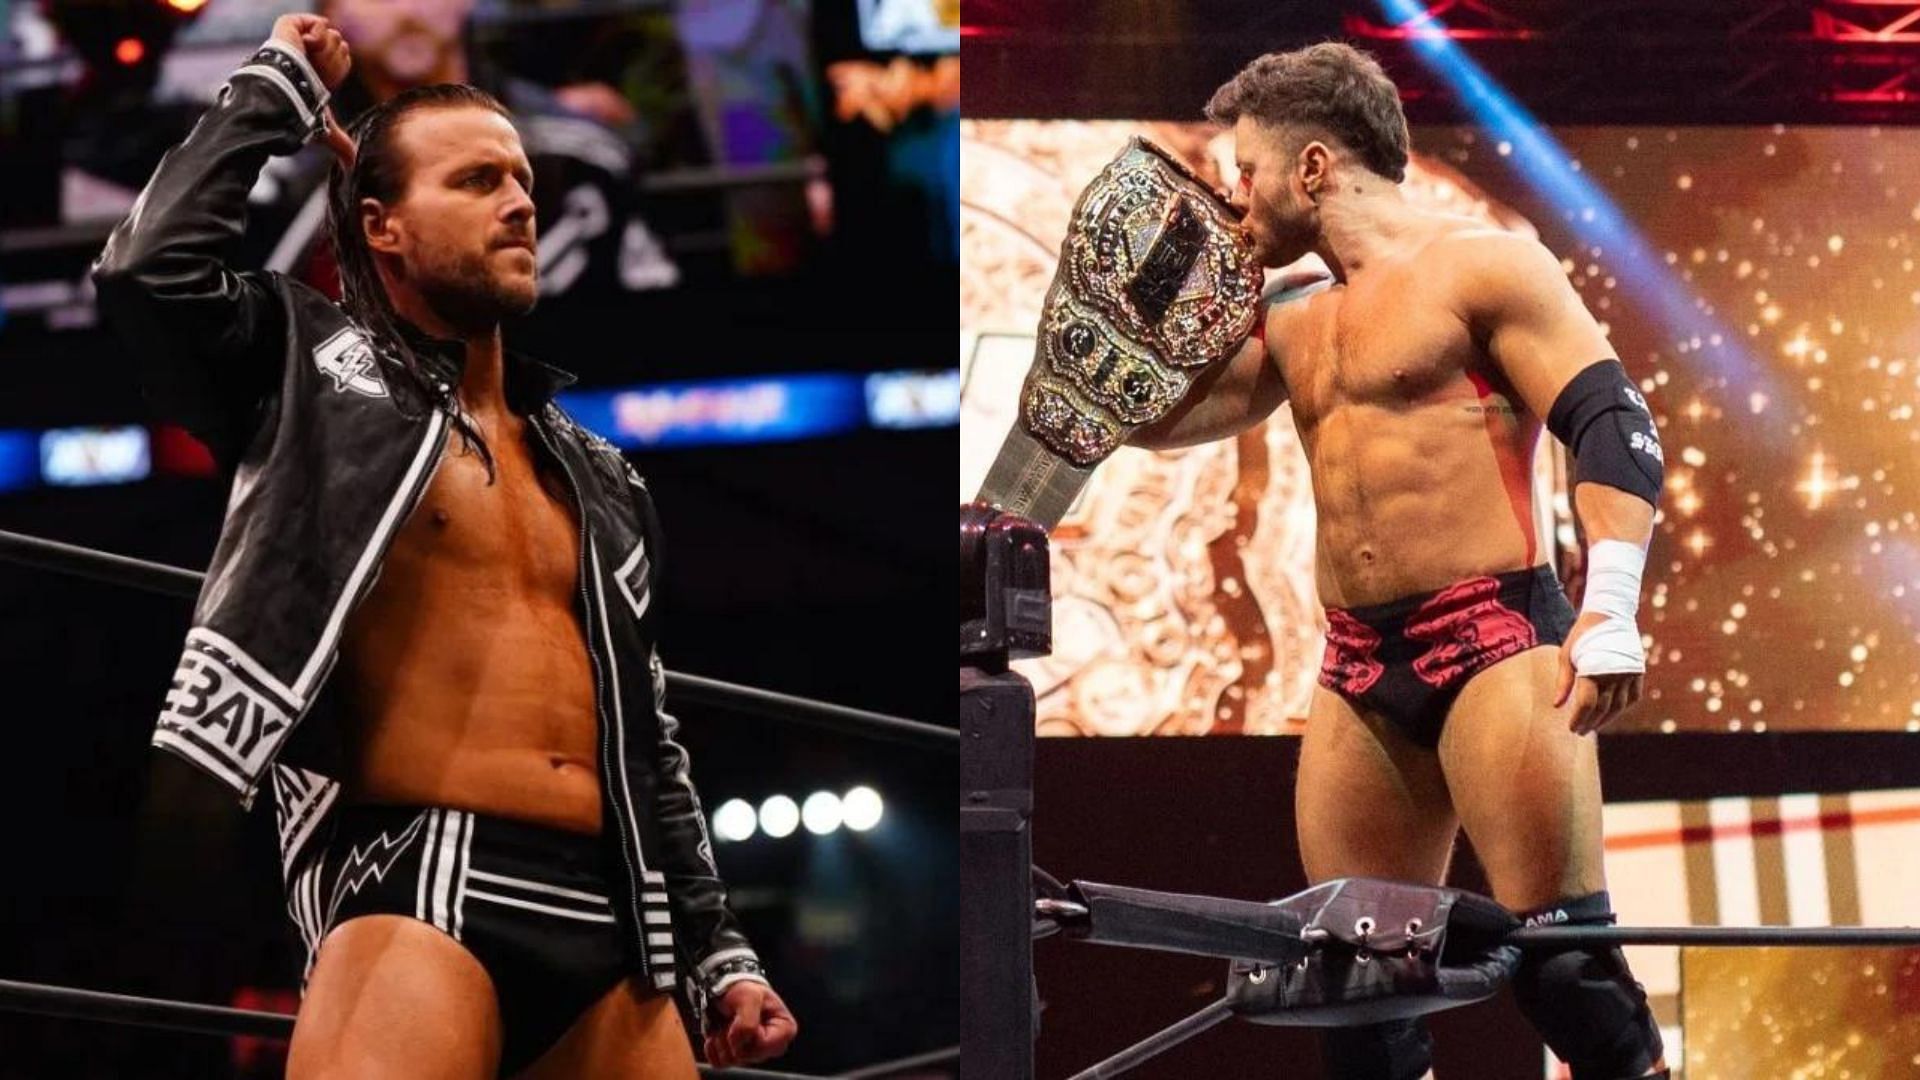 MJF and Adam Cole will face each other in the main event of AEW All In